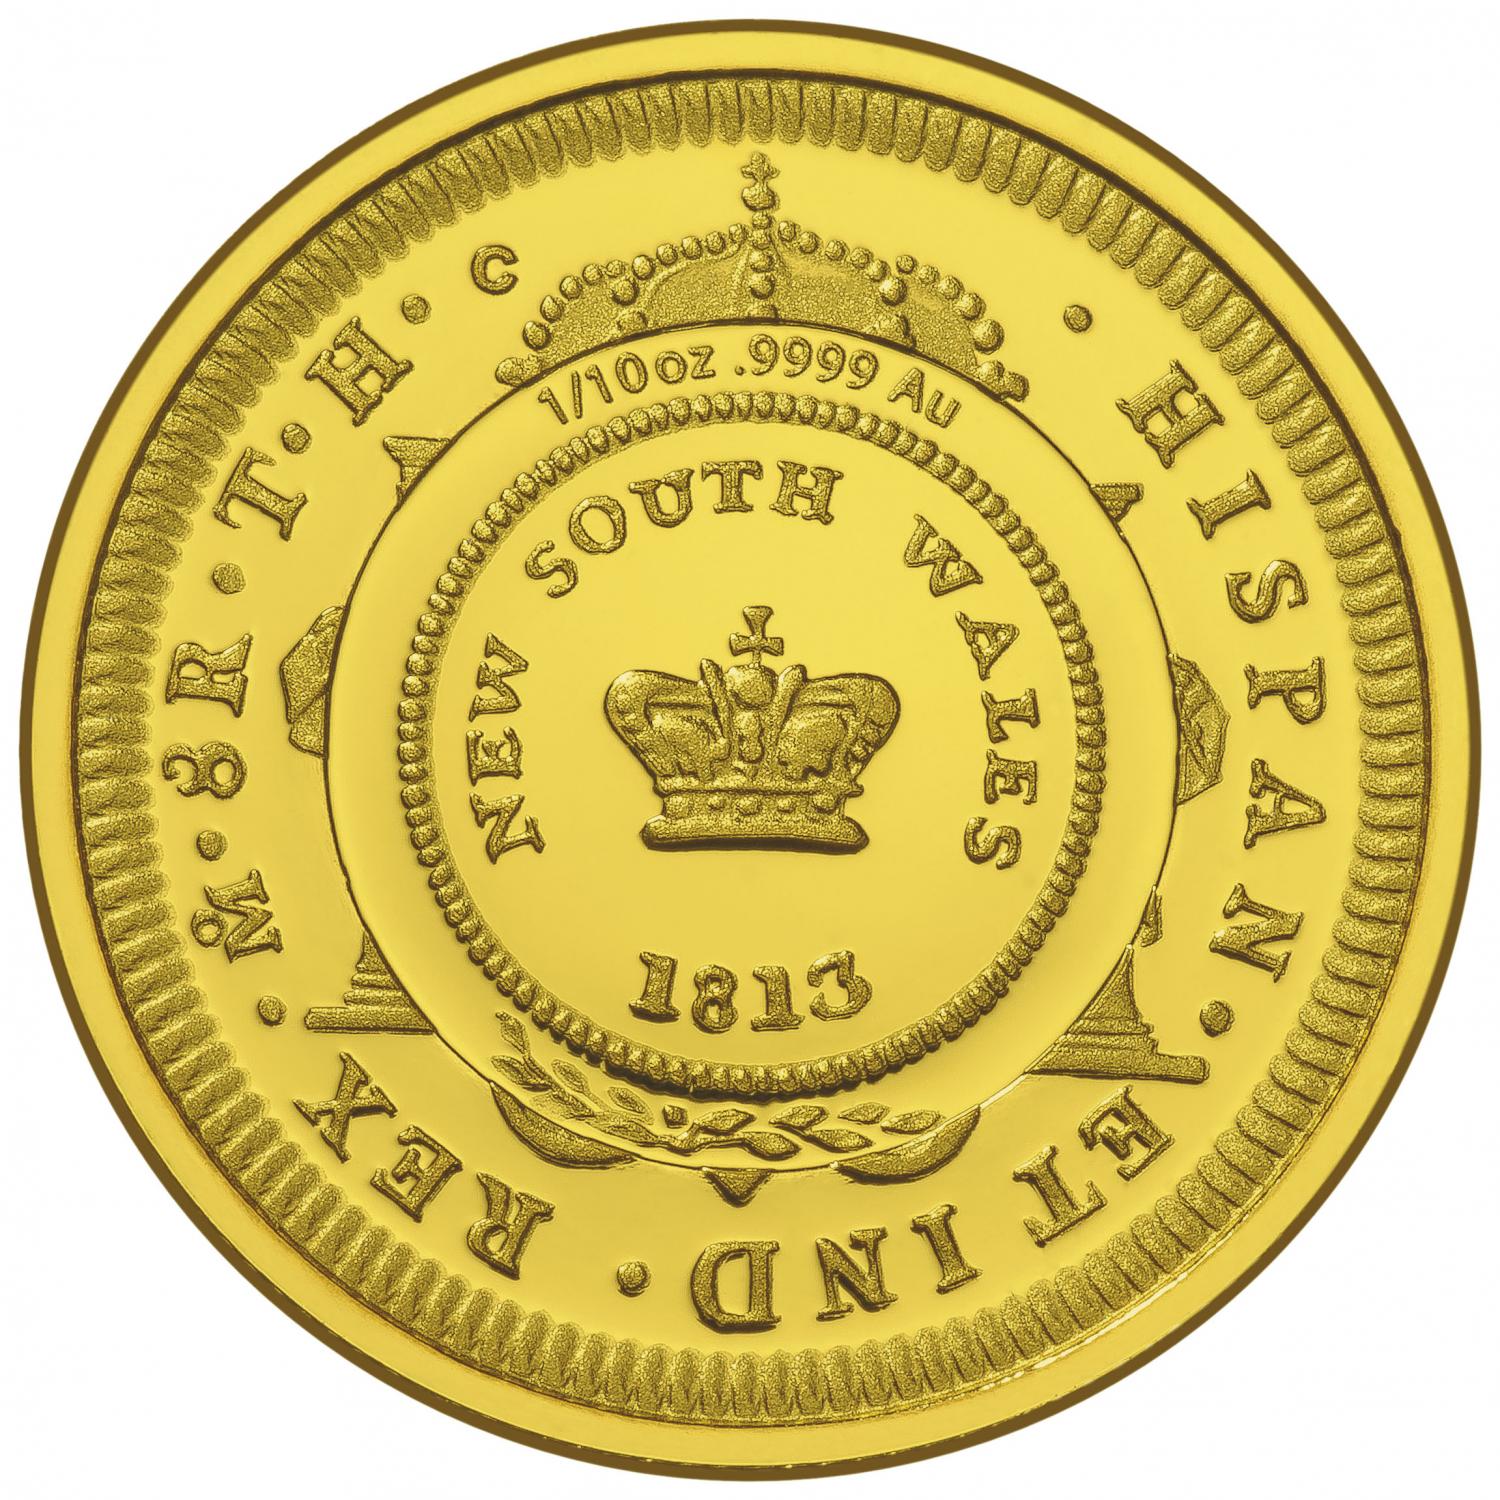 Thumbnail for 2013 Bicentenary of the Holy Dollar & Dump $10 Gold Proof Coin